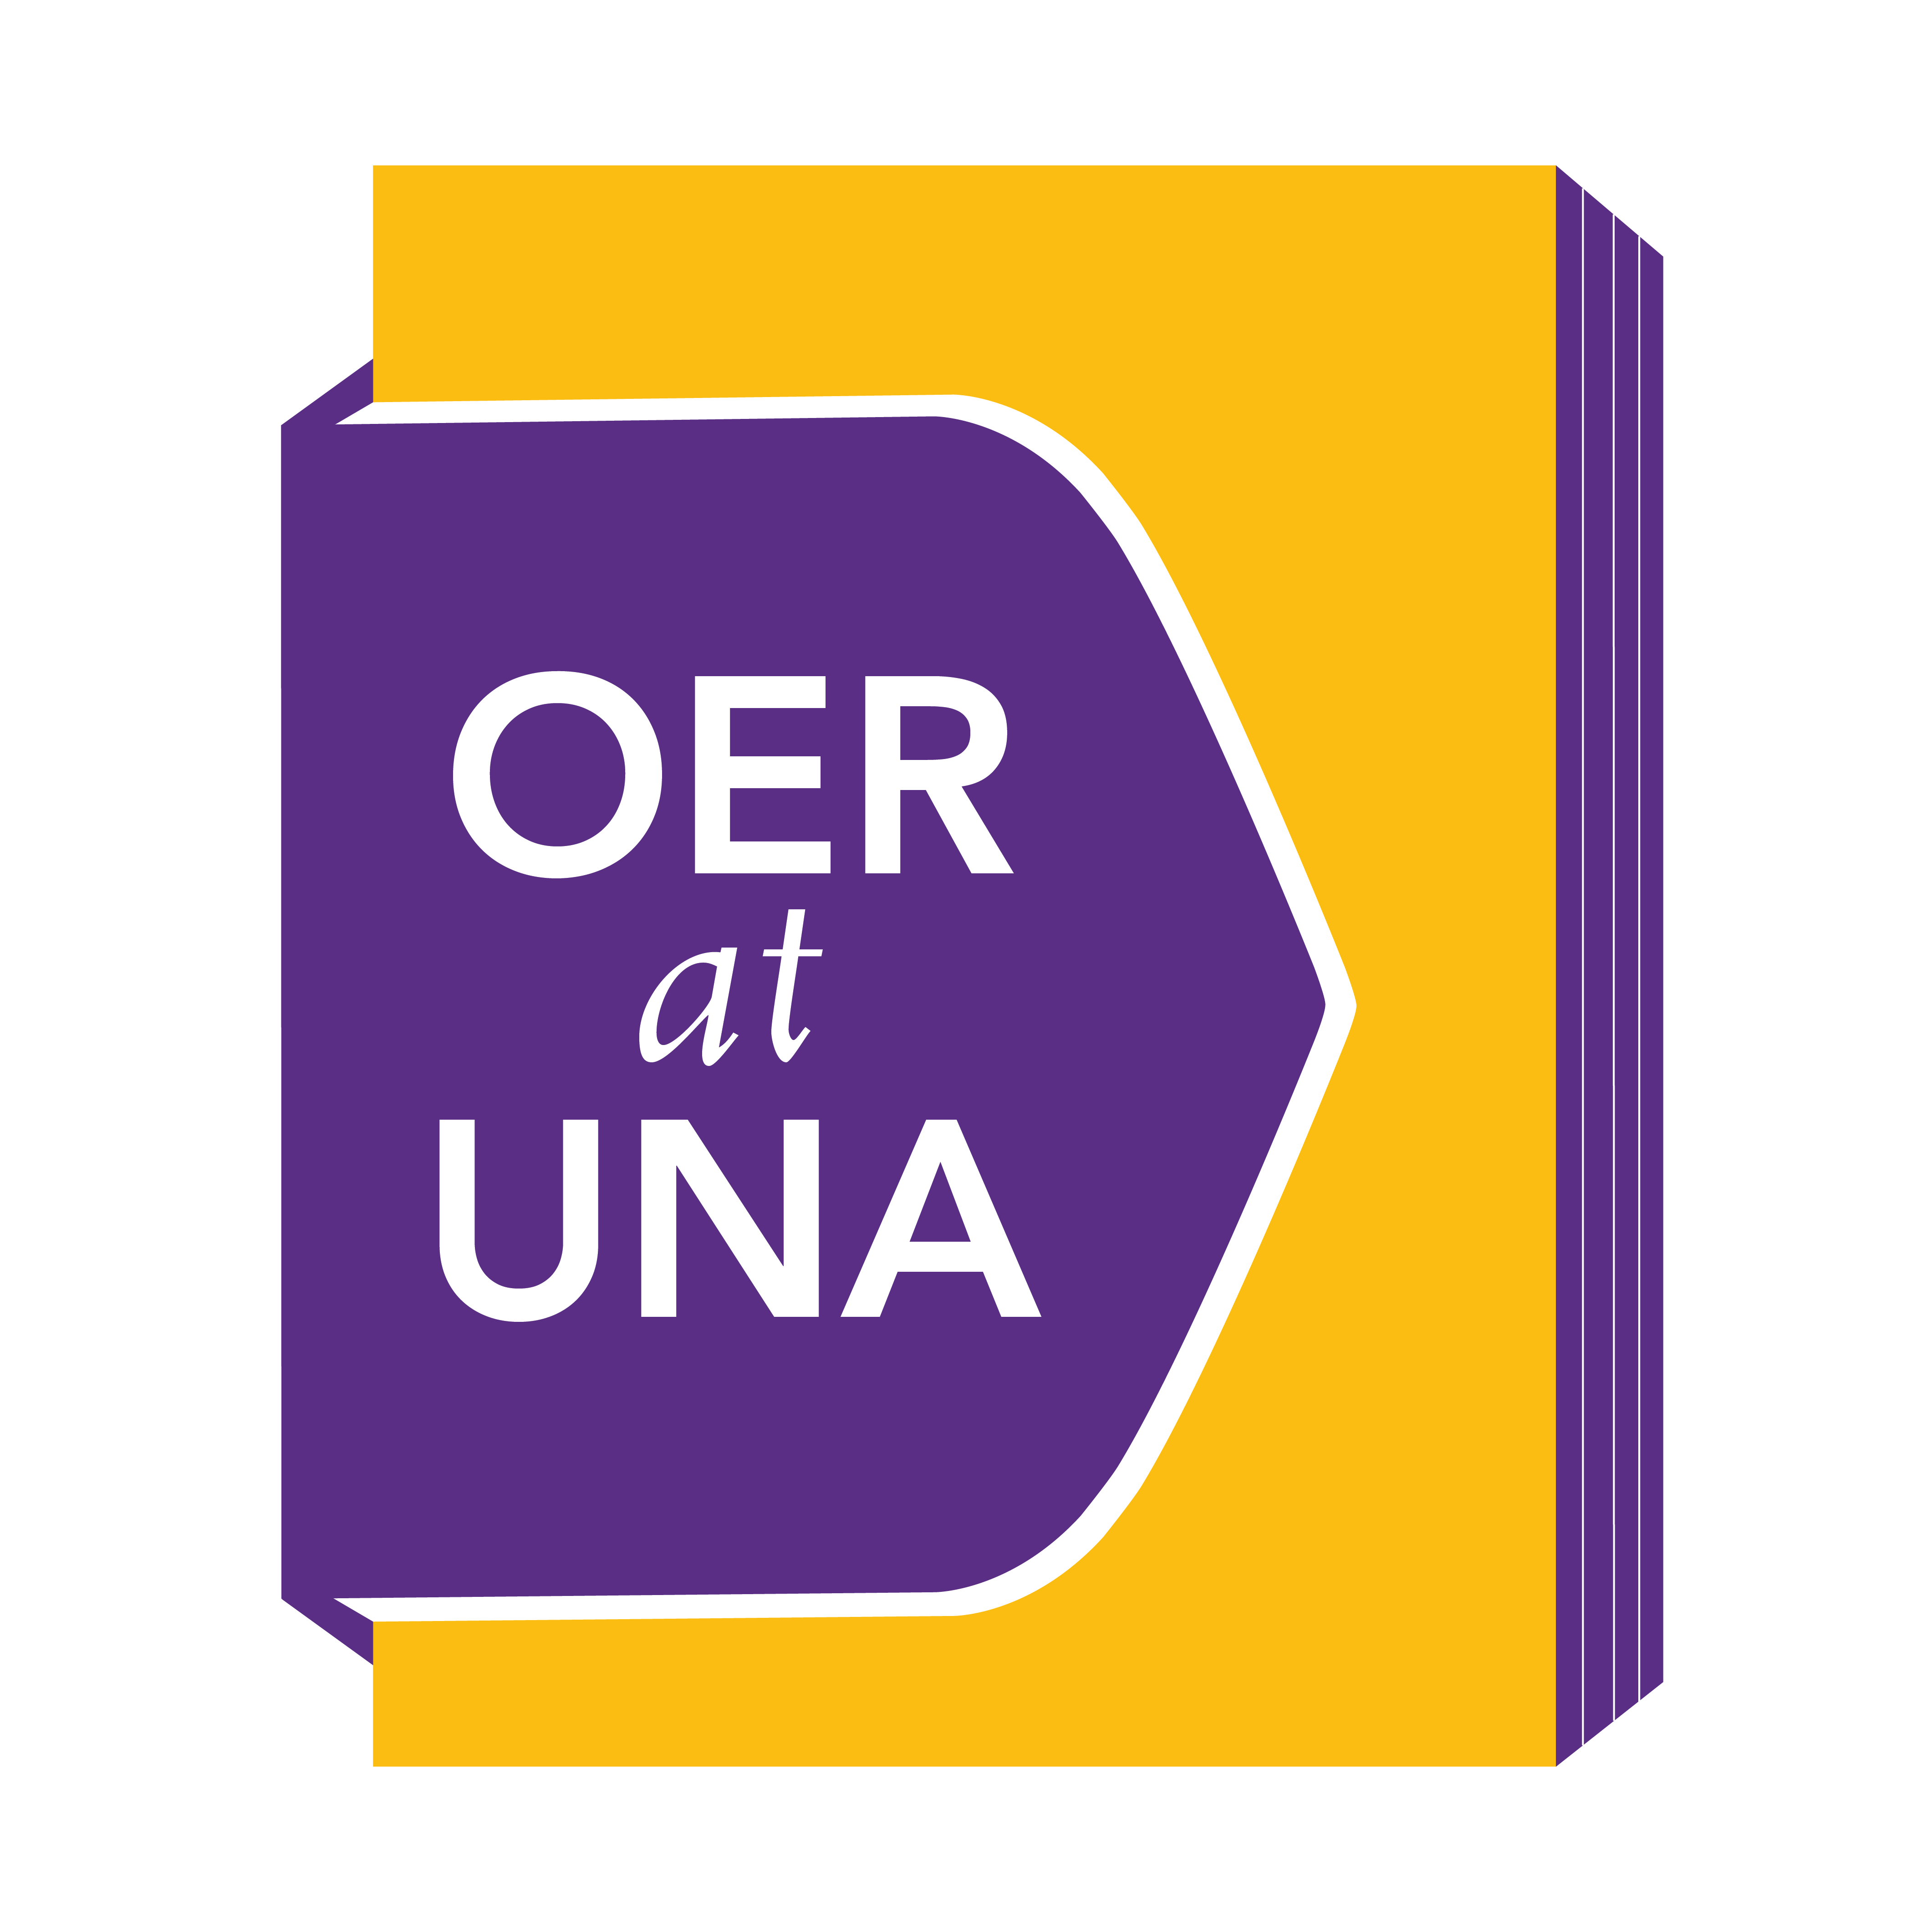 Faculty Experiences with OER